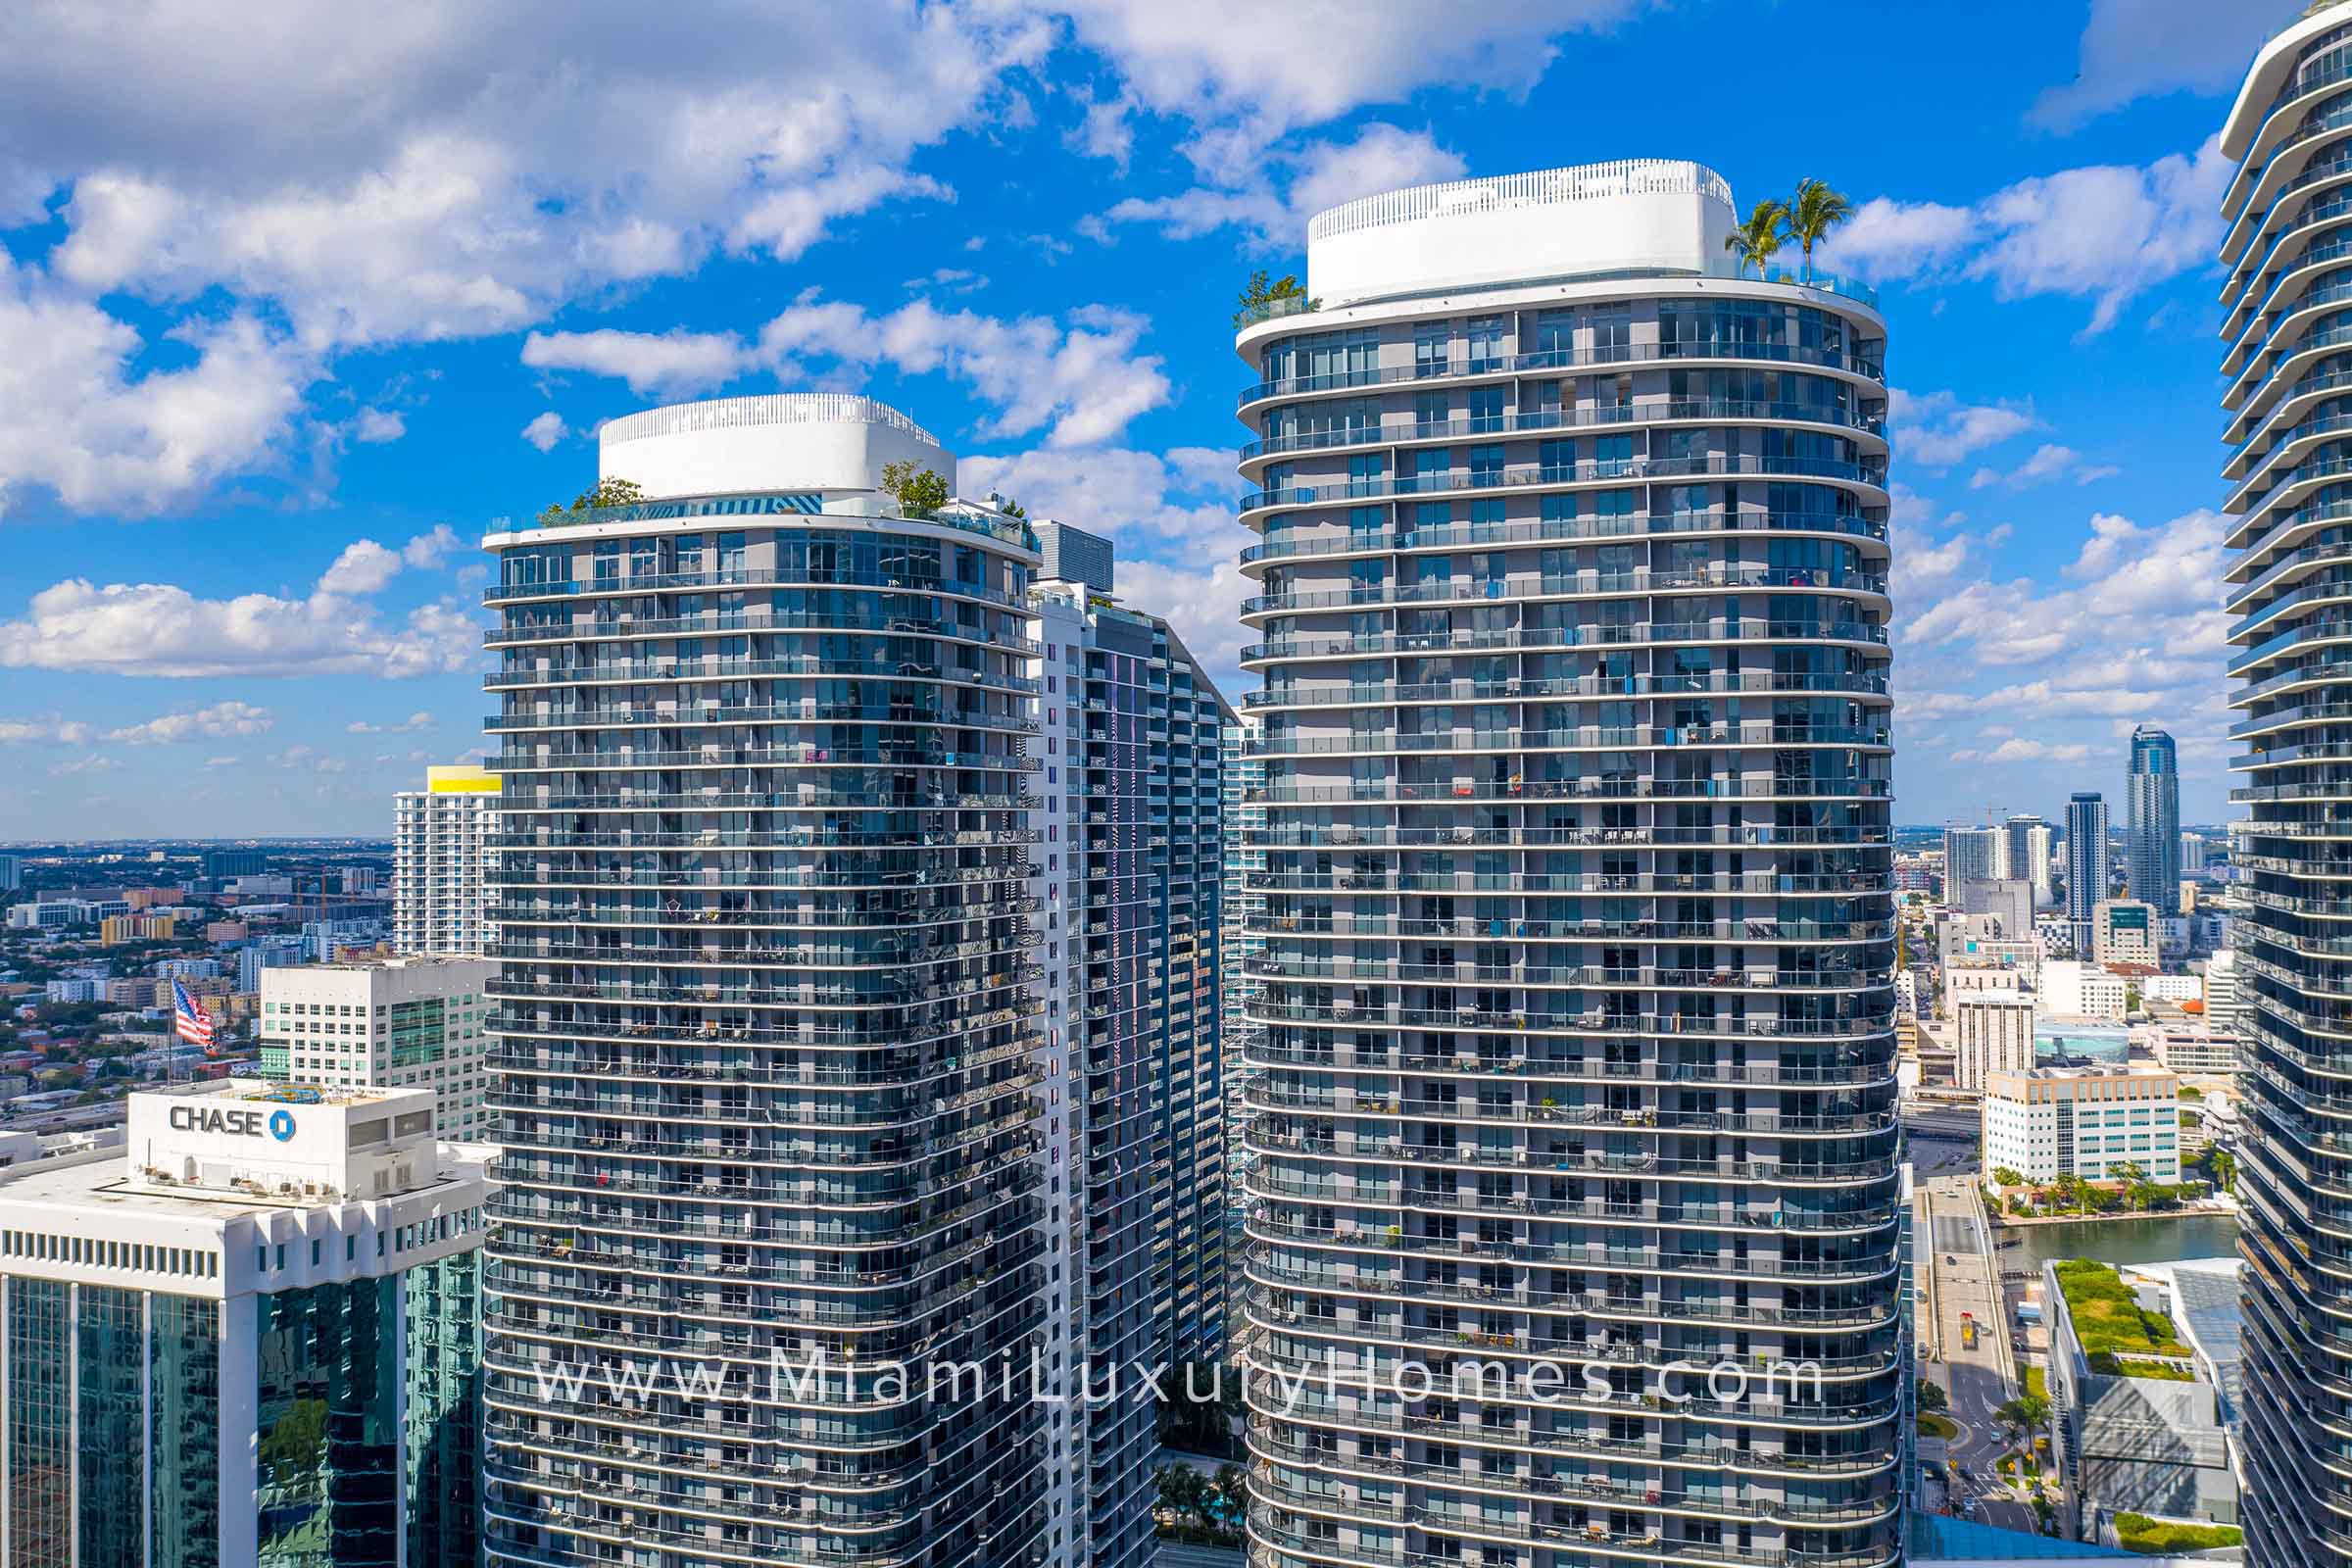 Brickell Heights in Miami